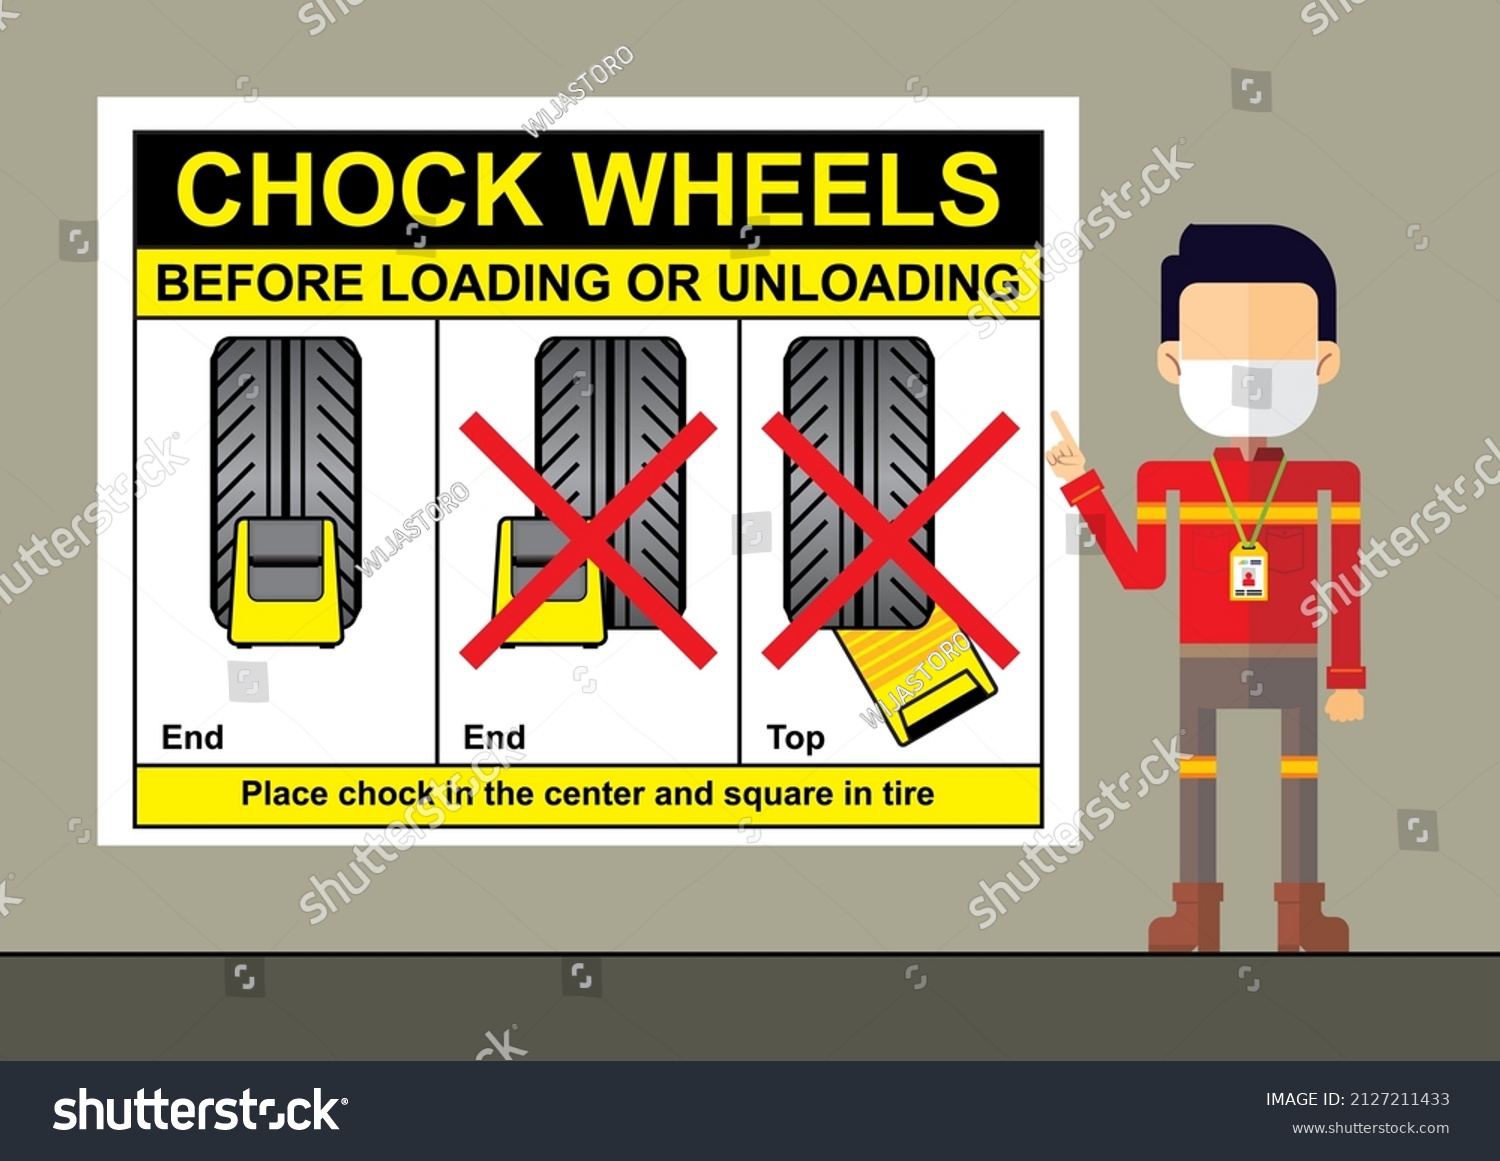 SVG of Safety manager or personnel flat style cartoon character on presentation of chock wheels before loading and unloading for vehicle safety rules. svg